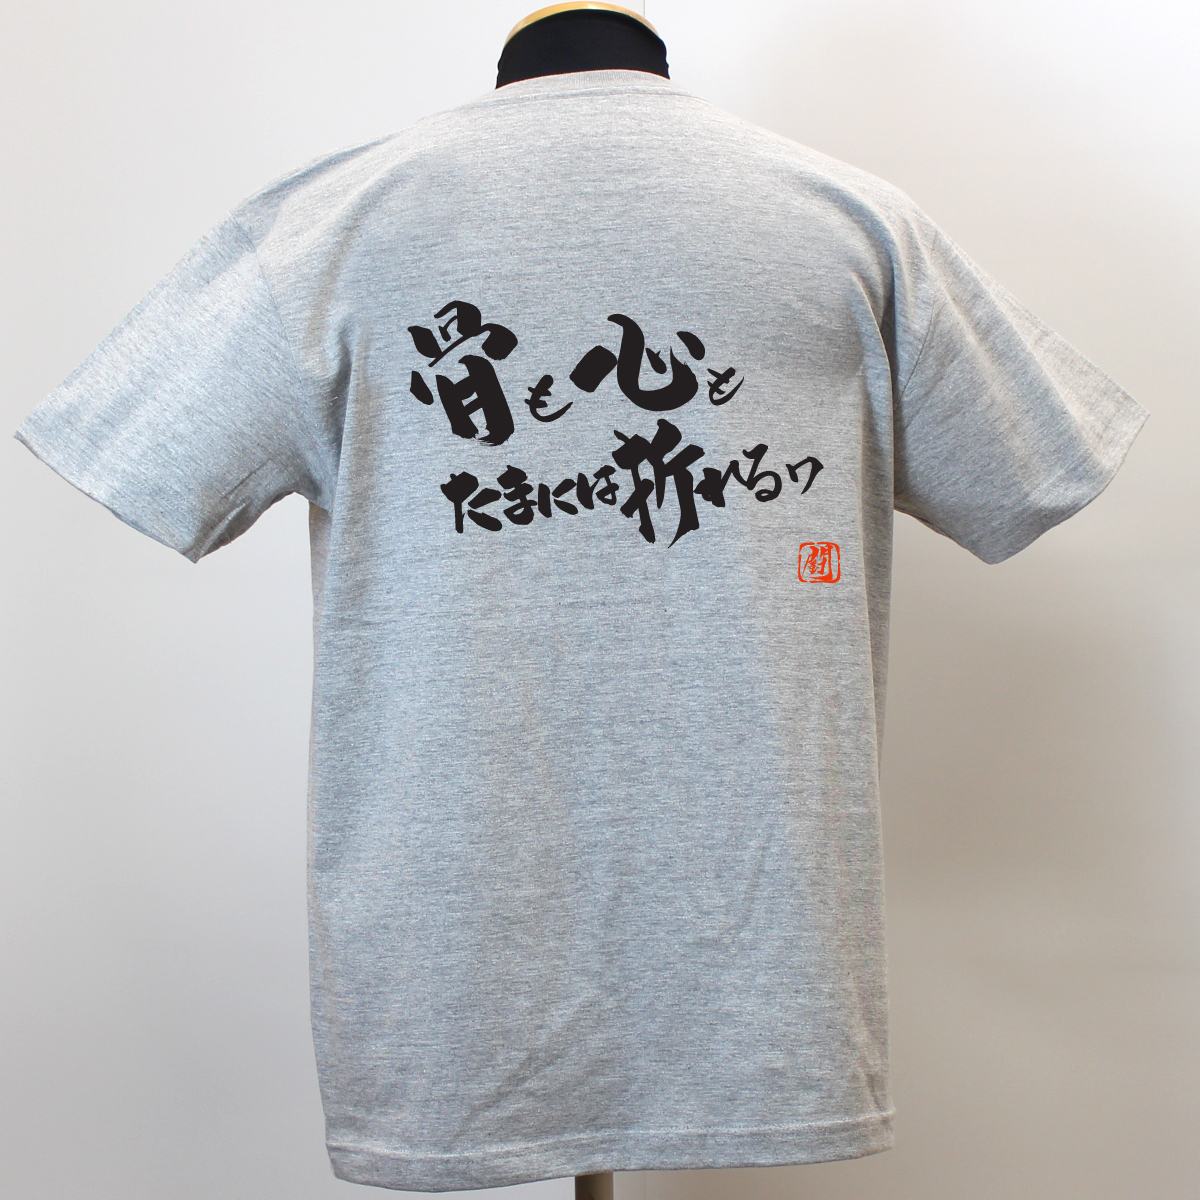 RUGBY PRO SHOP Ryu 骨も心も 綿Tシャツ【普段着用】